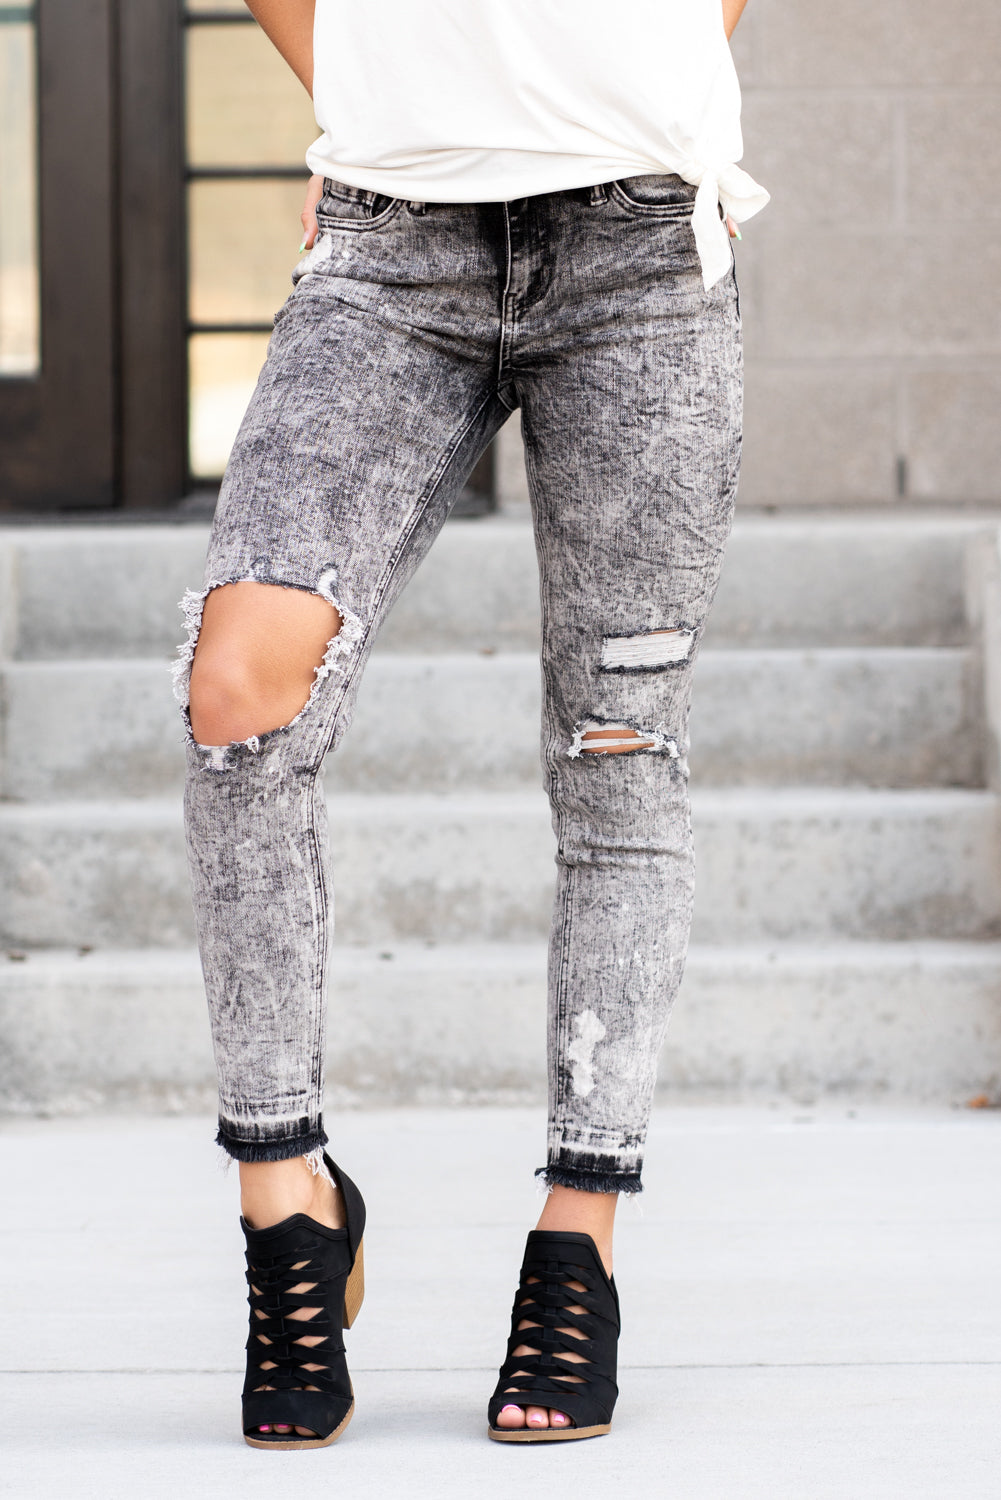 Here's How to Acid Wash Jeans 2021 — Acid Wash Jeans How To